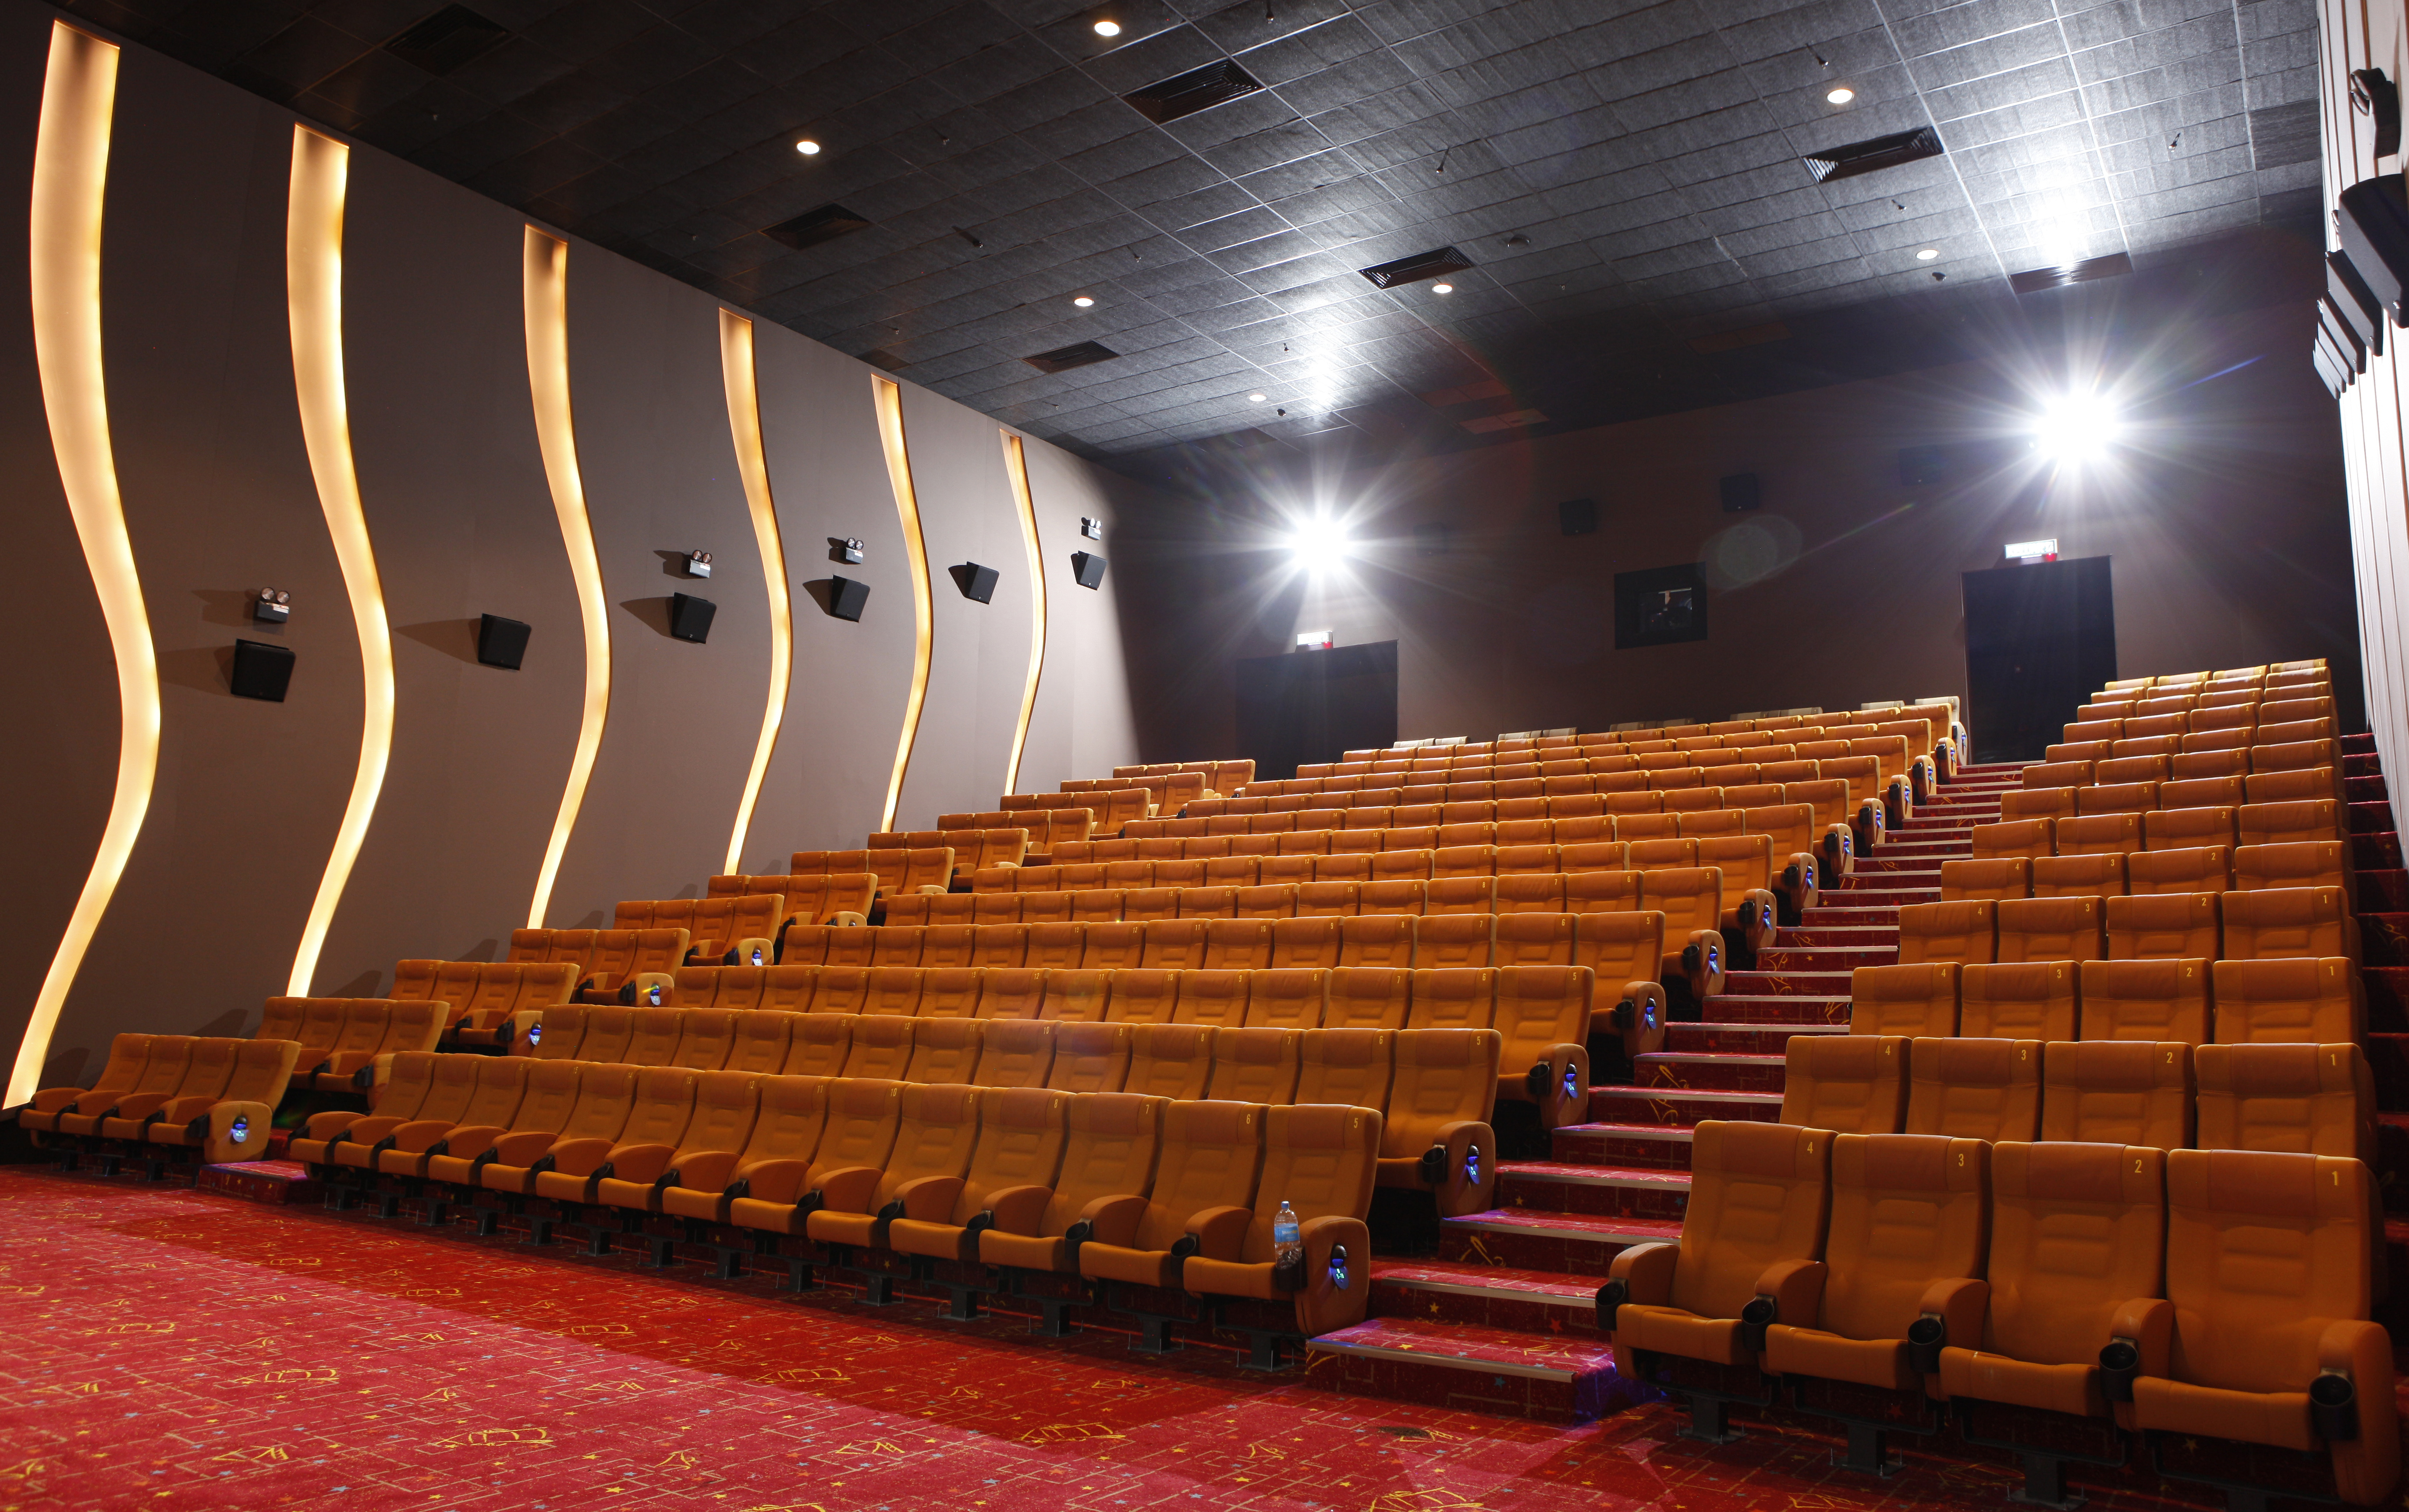 #GSC: Swanky Quill City Mall Cinema Launched! - Hype Malaysia